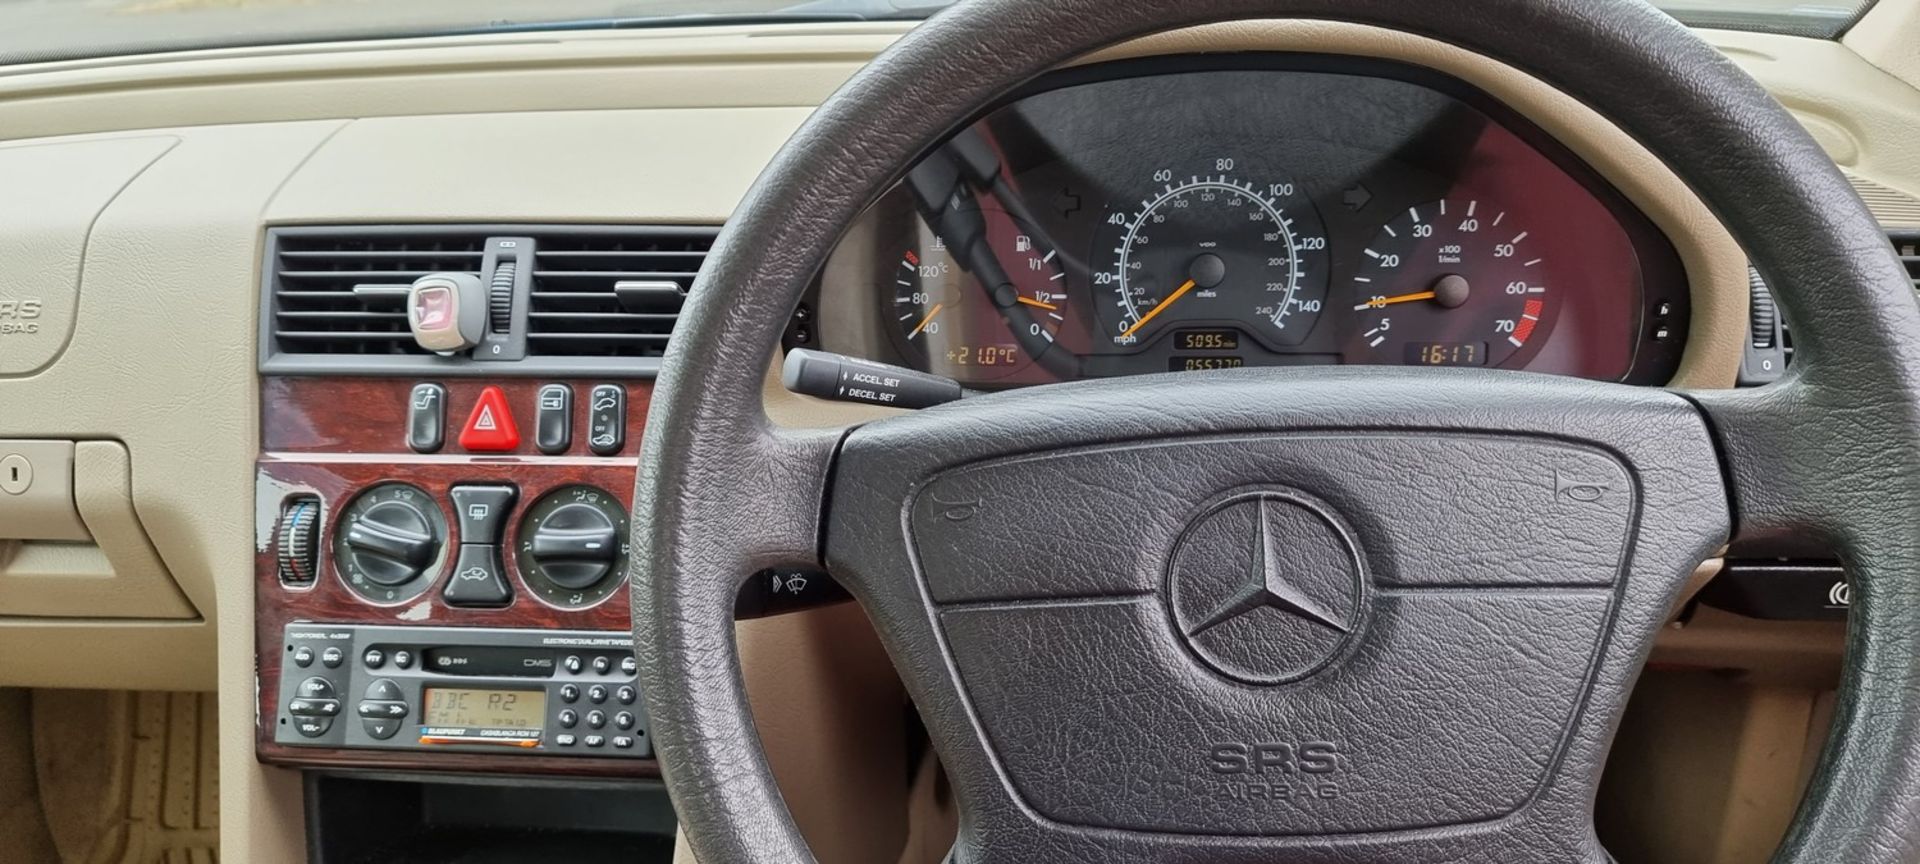 1997 Mercedes Benz W202 C180, Registration number R654 MGT. Chassis number . Engine number . In - Image 10 of 16